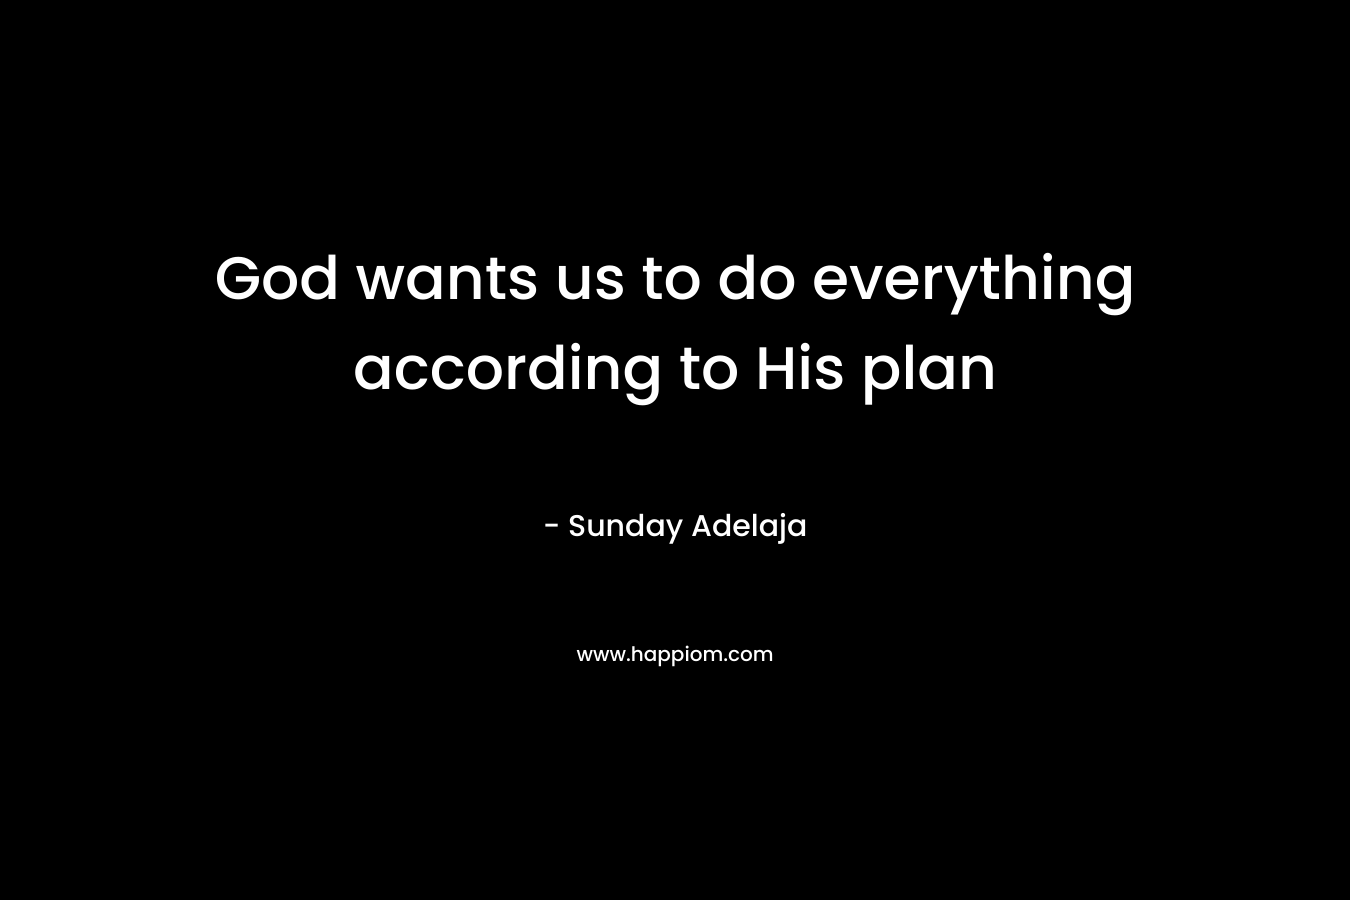 God wants us to do everything according to His plan